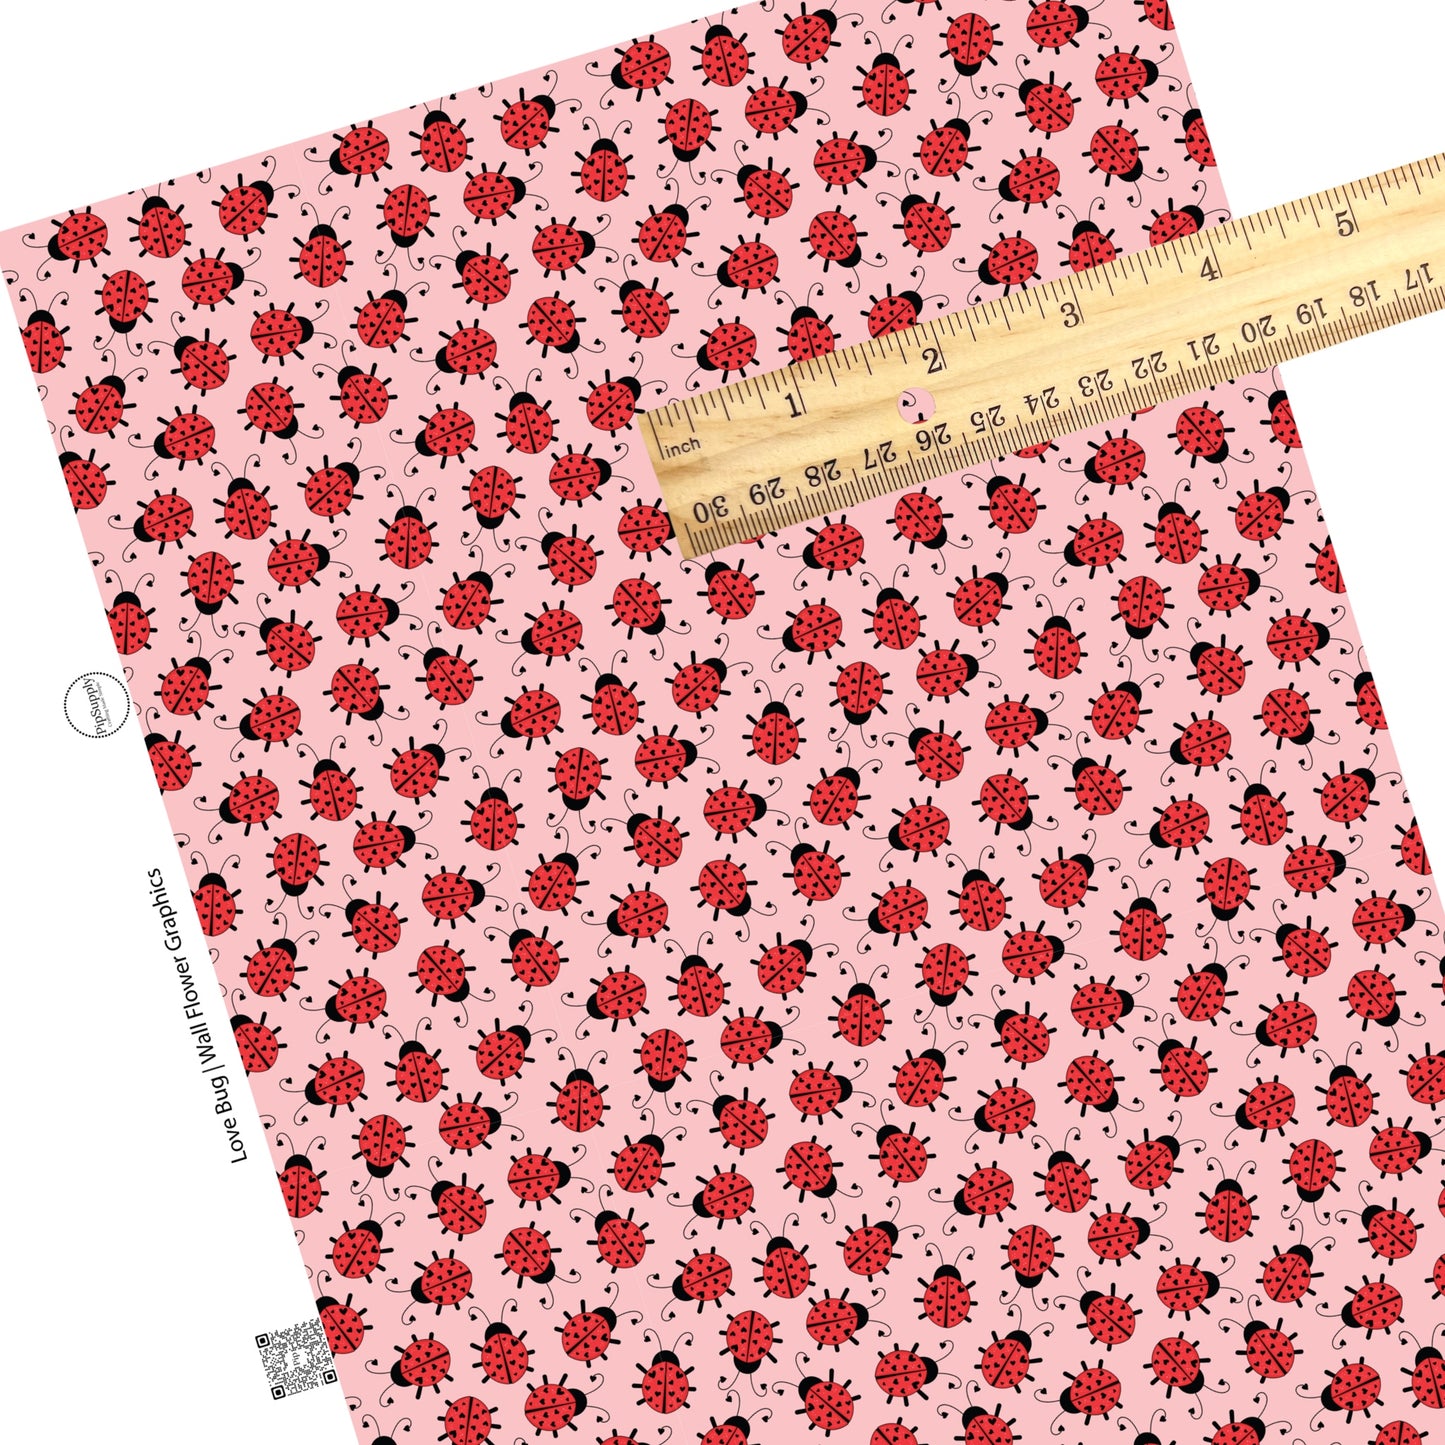 Scattered lady bugs on pink faux leather sheets